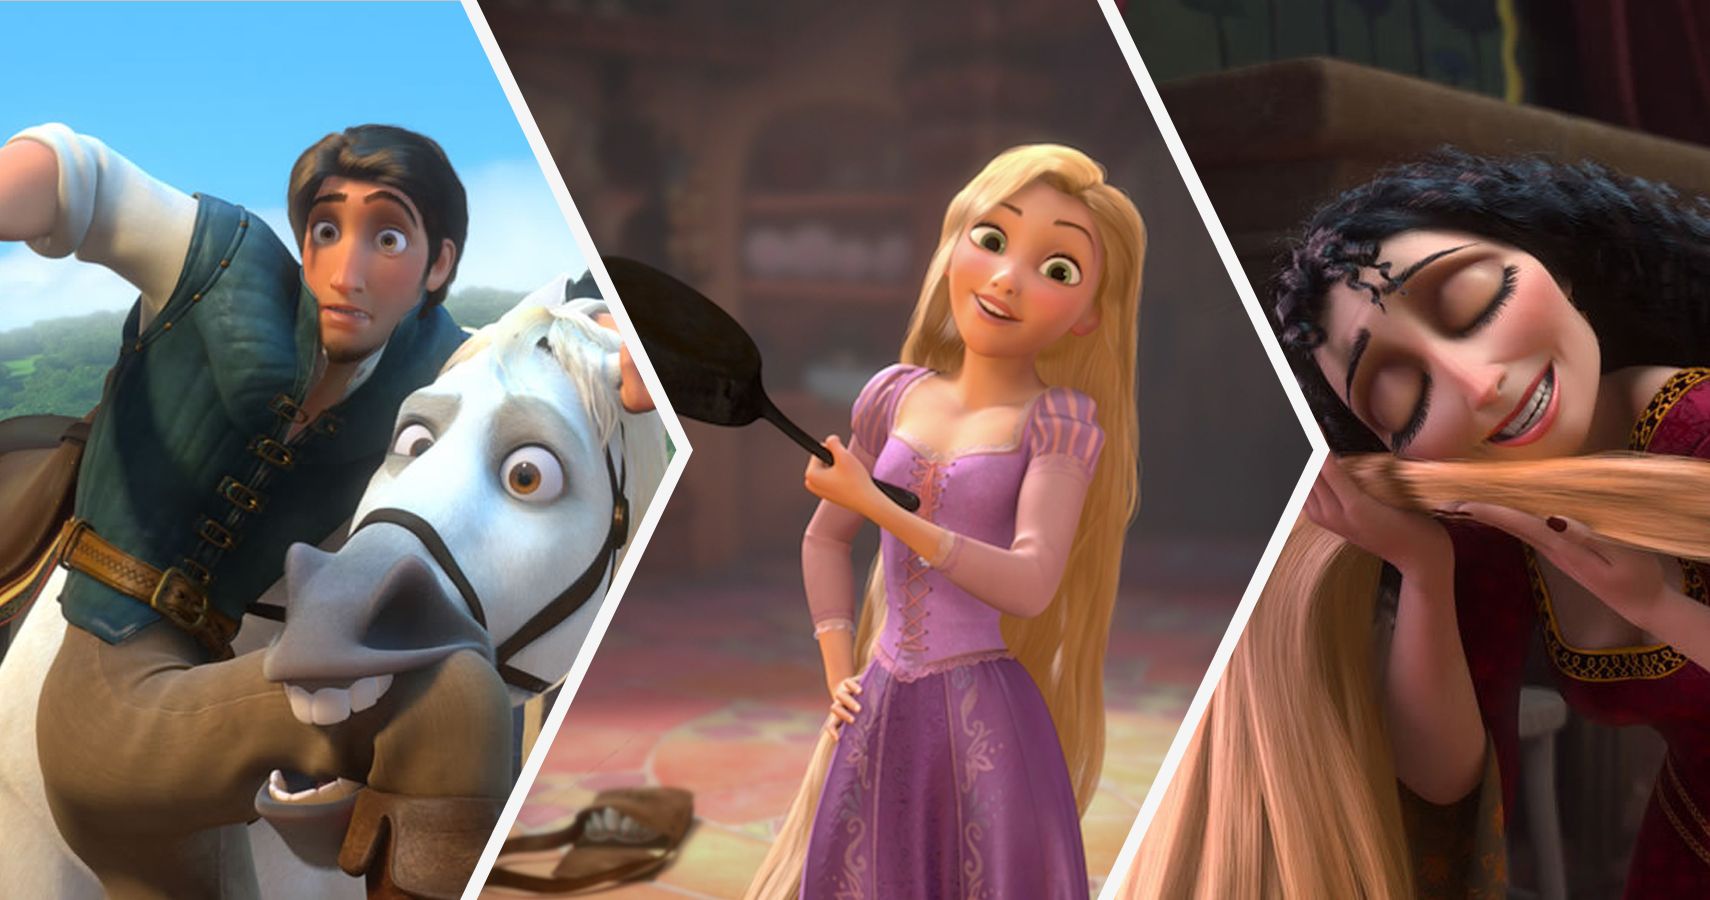 26 Plot Holes, Unsolved Mysteries, And Hanging Threads In Disney's Tangled